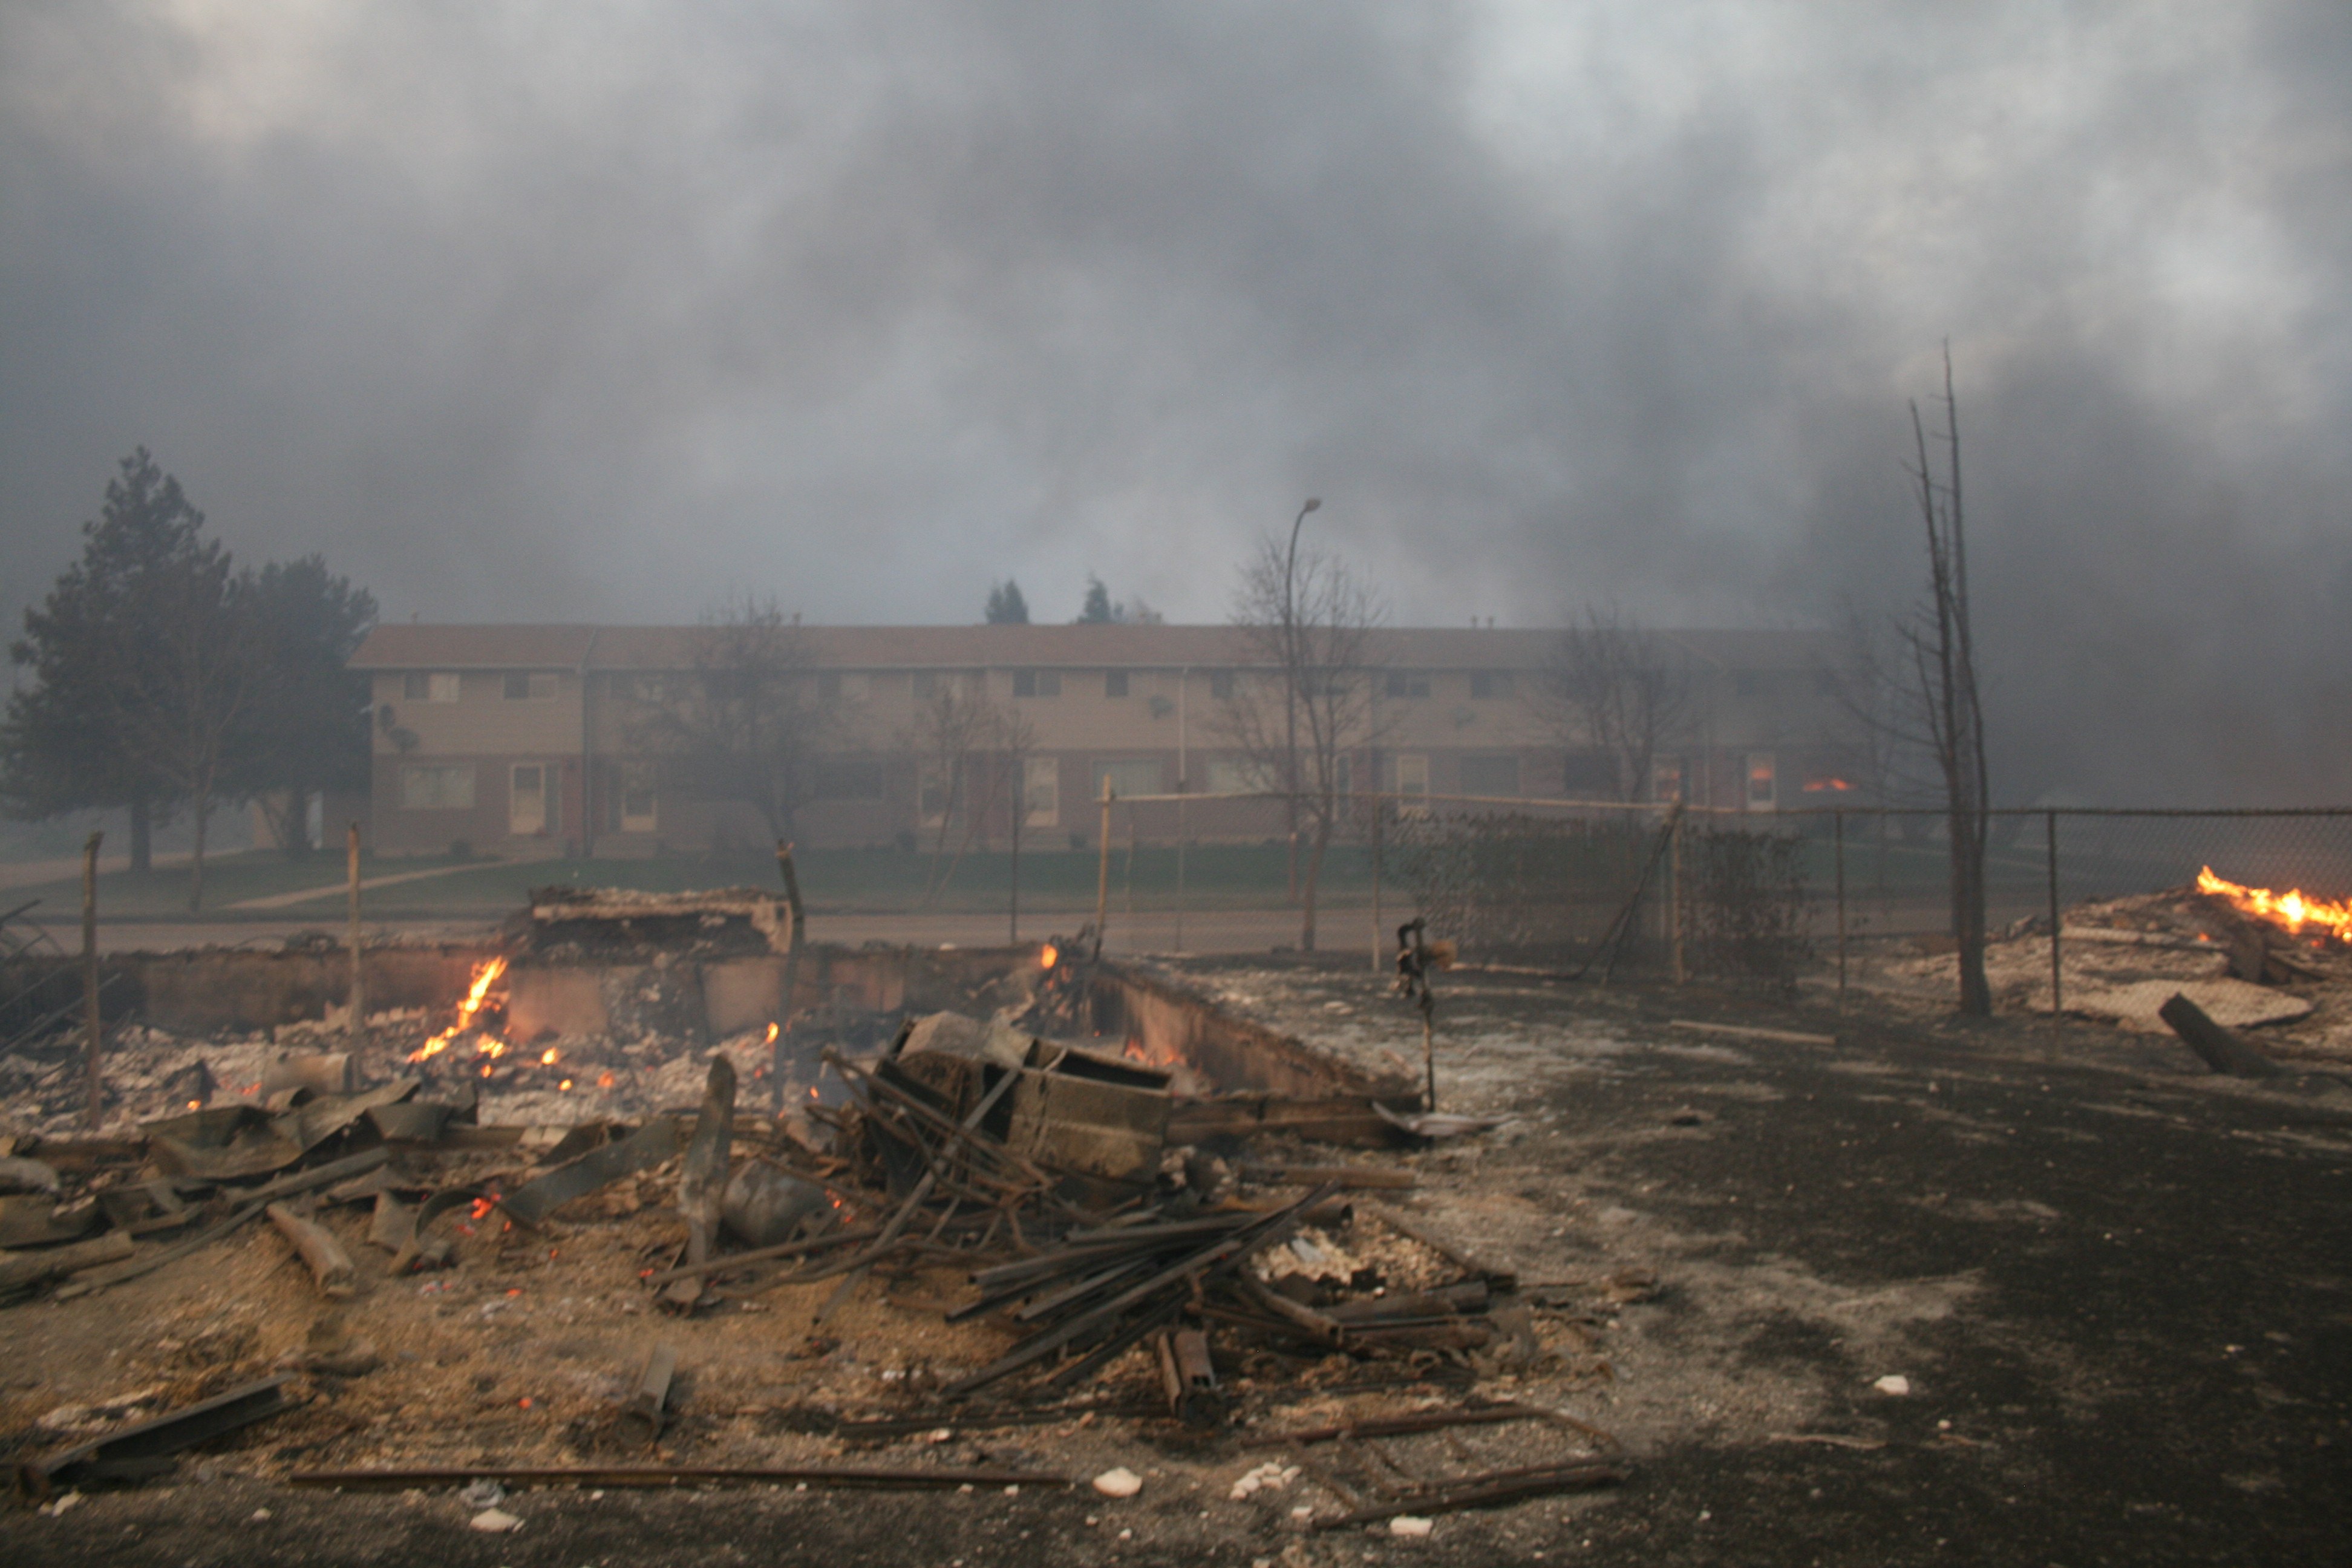 Destruction in Slave Lake area from wildfires